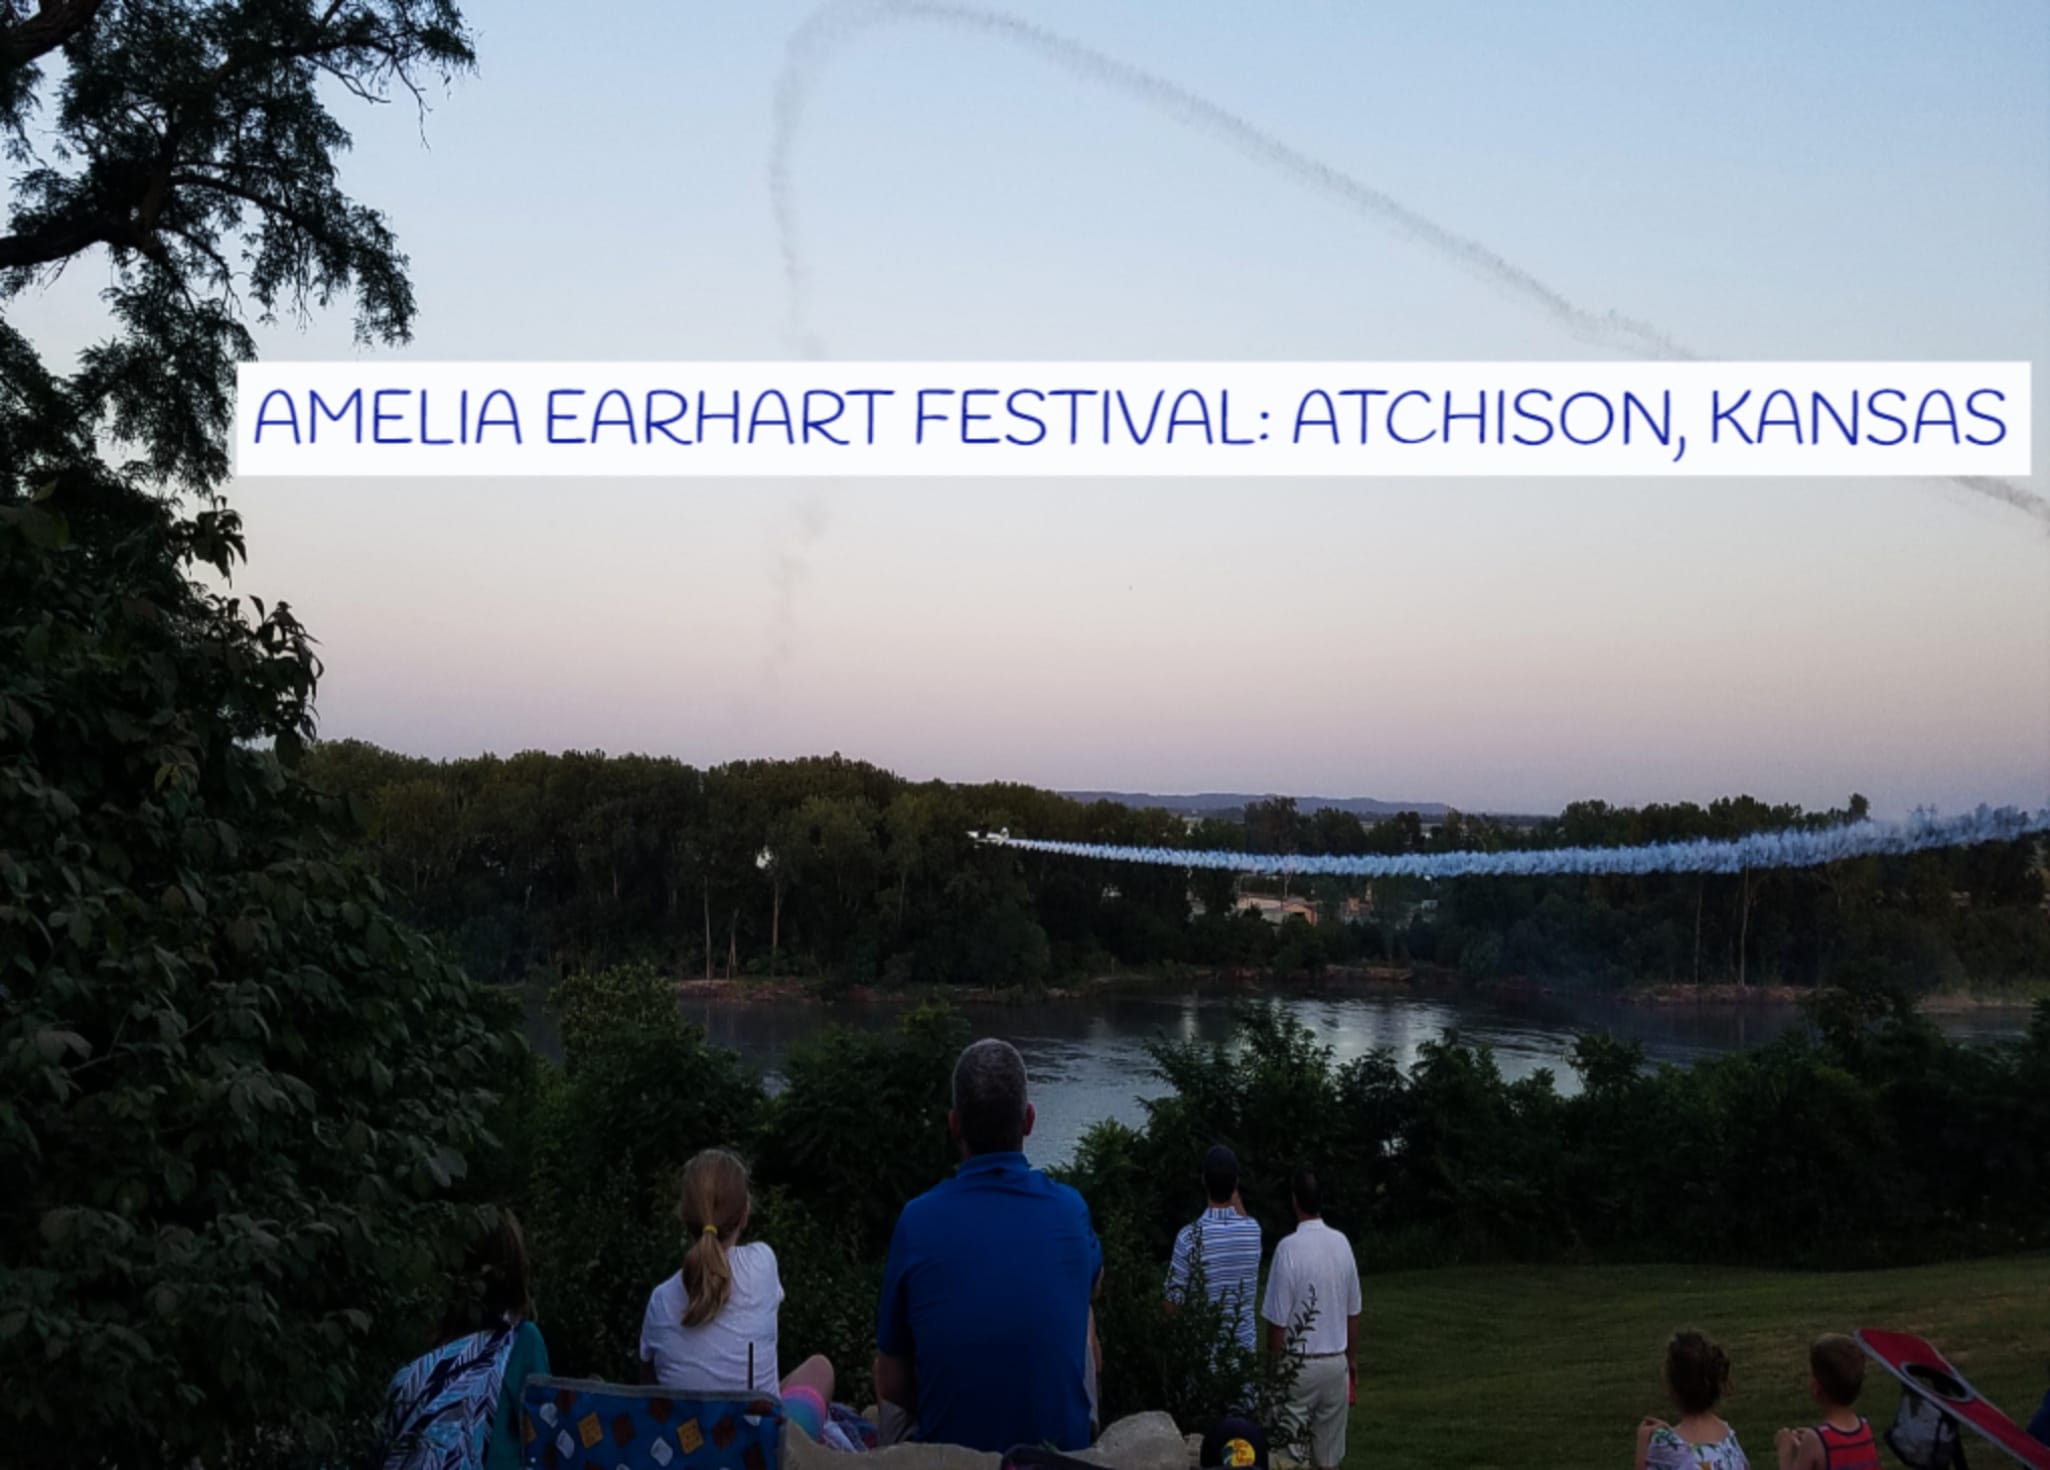 Amelia Earhart Festival come around every year in Atchison, Kansas